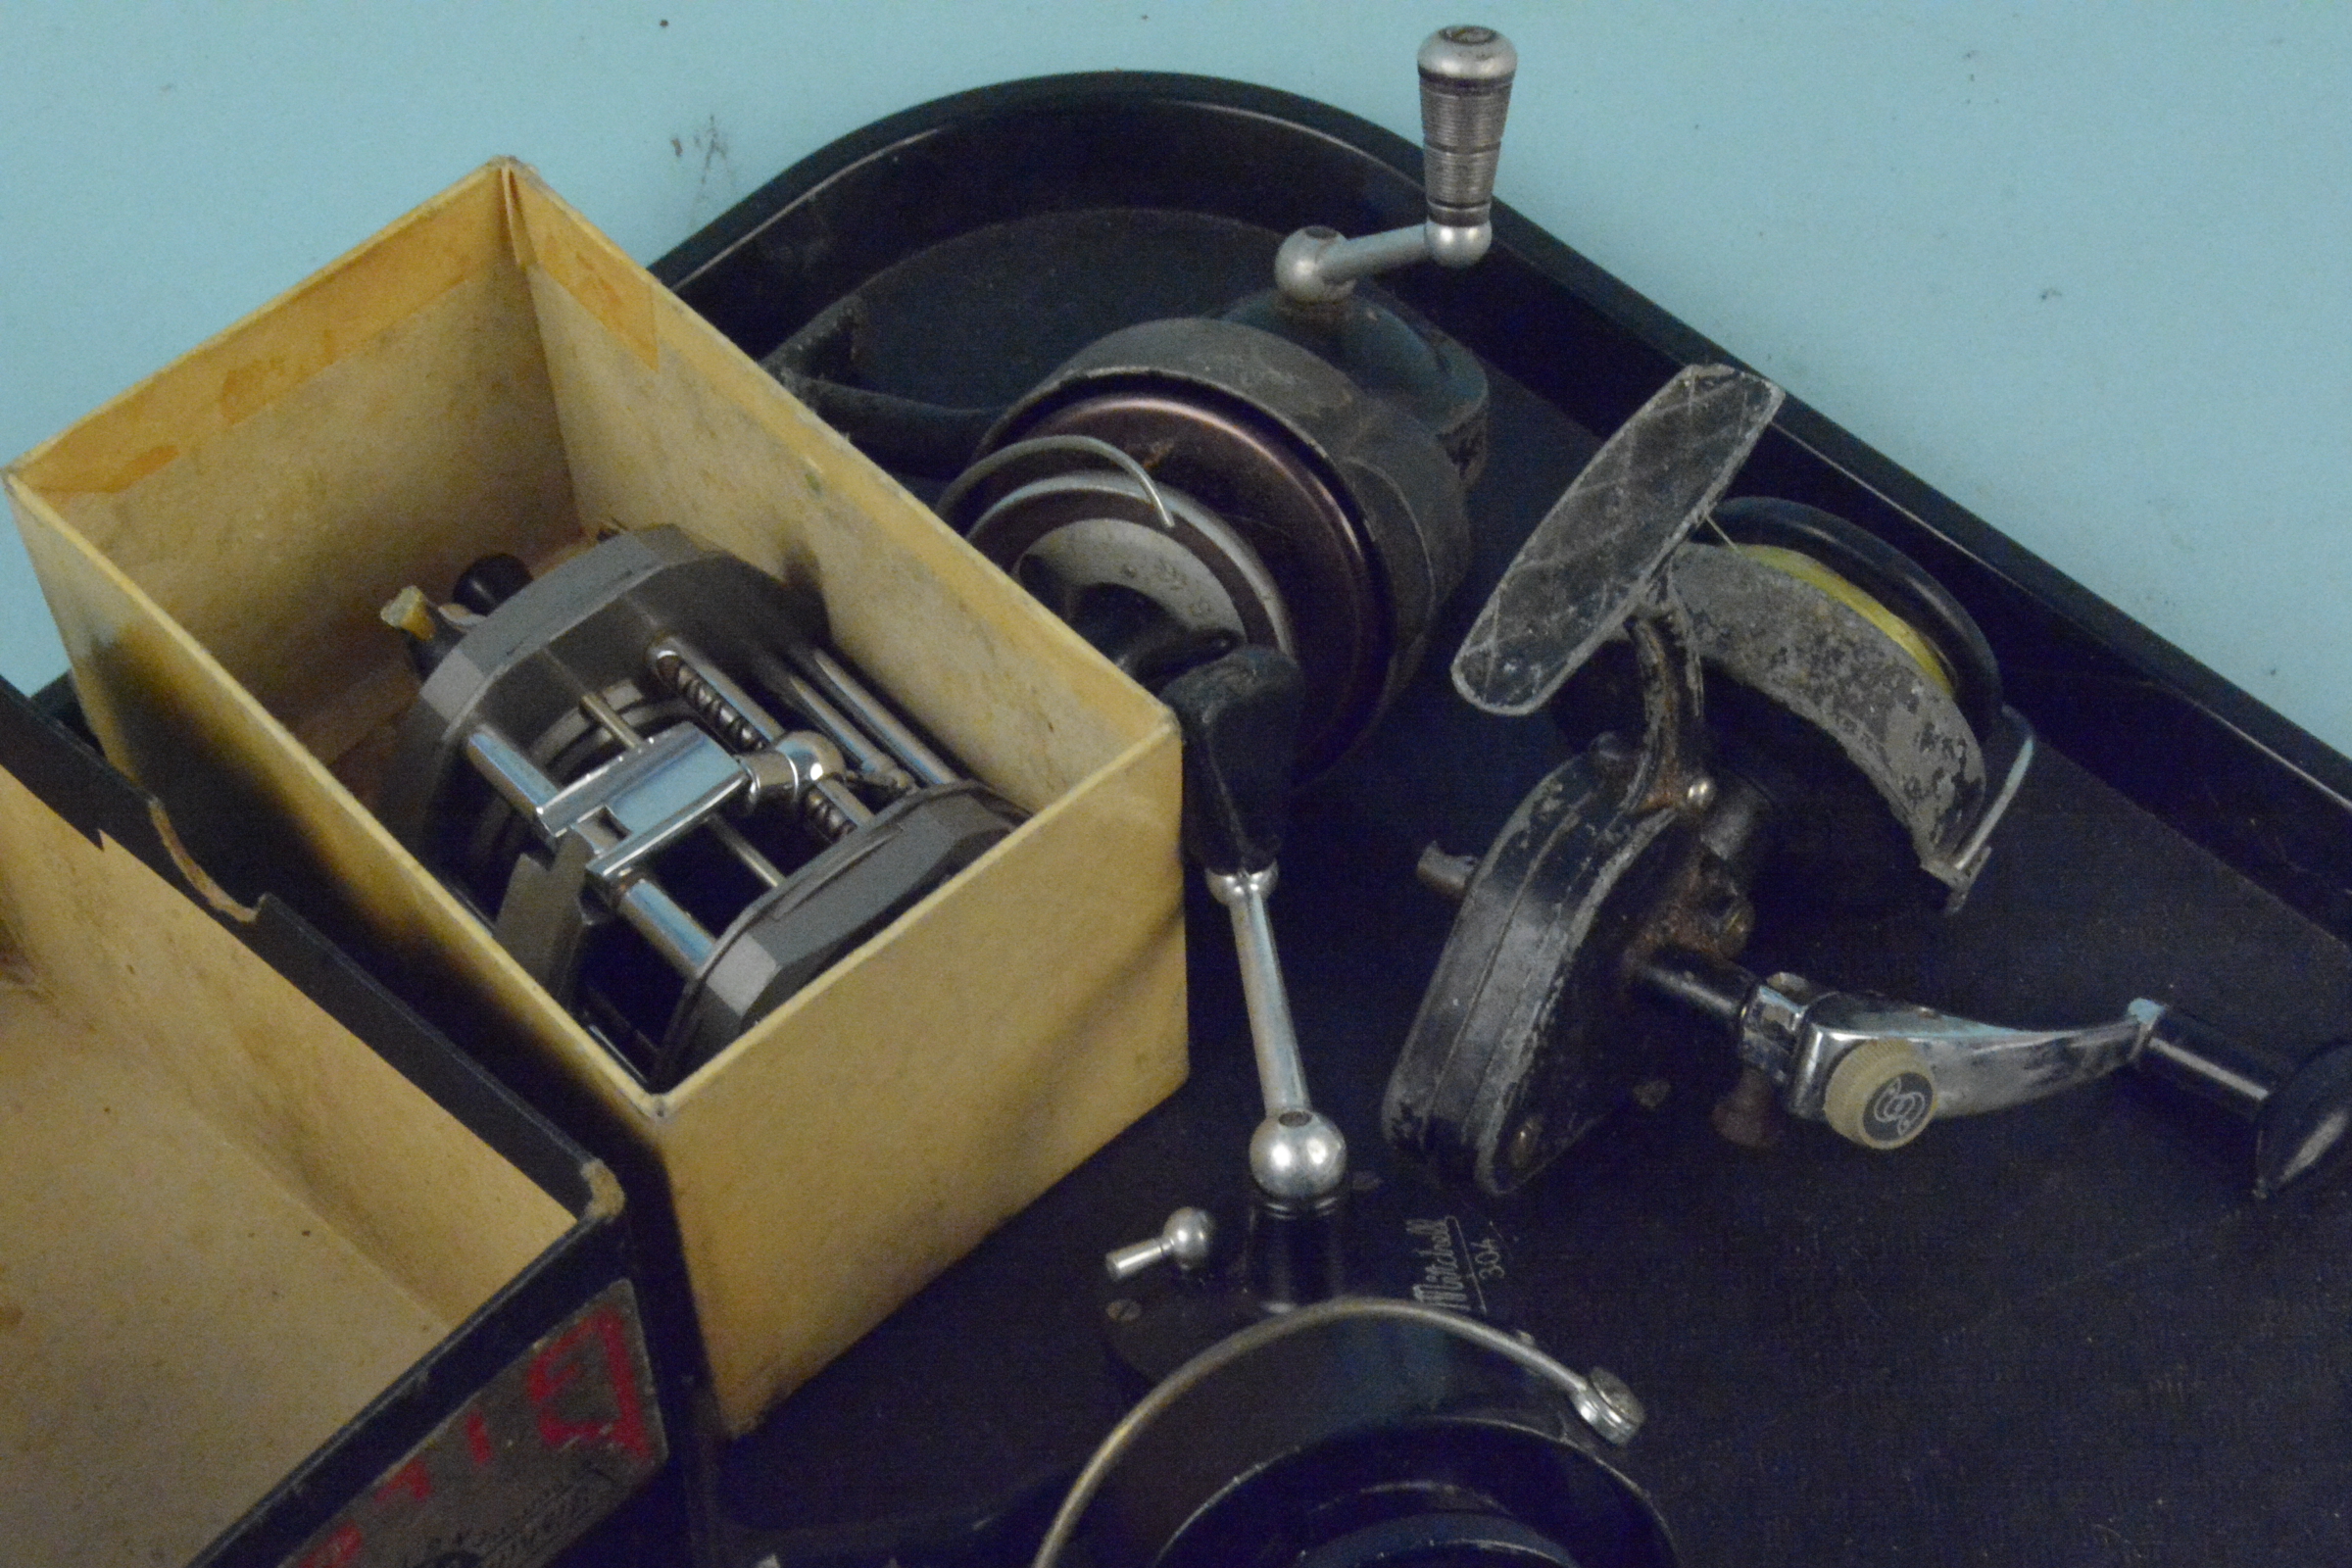 Six early fixed spool reels and a Gildex boxed multiplier reel (handle as found) - Image 2 of 3